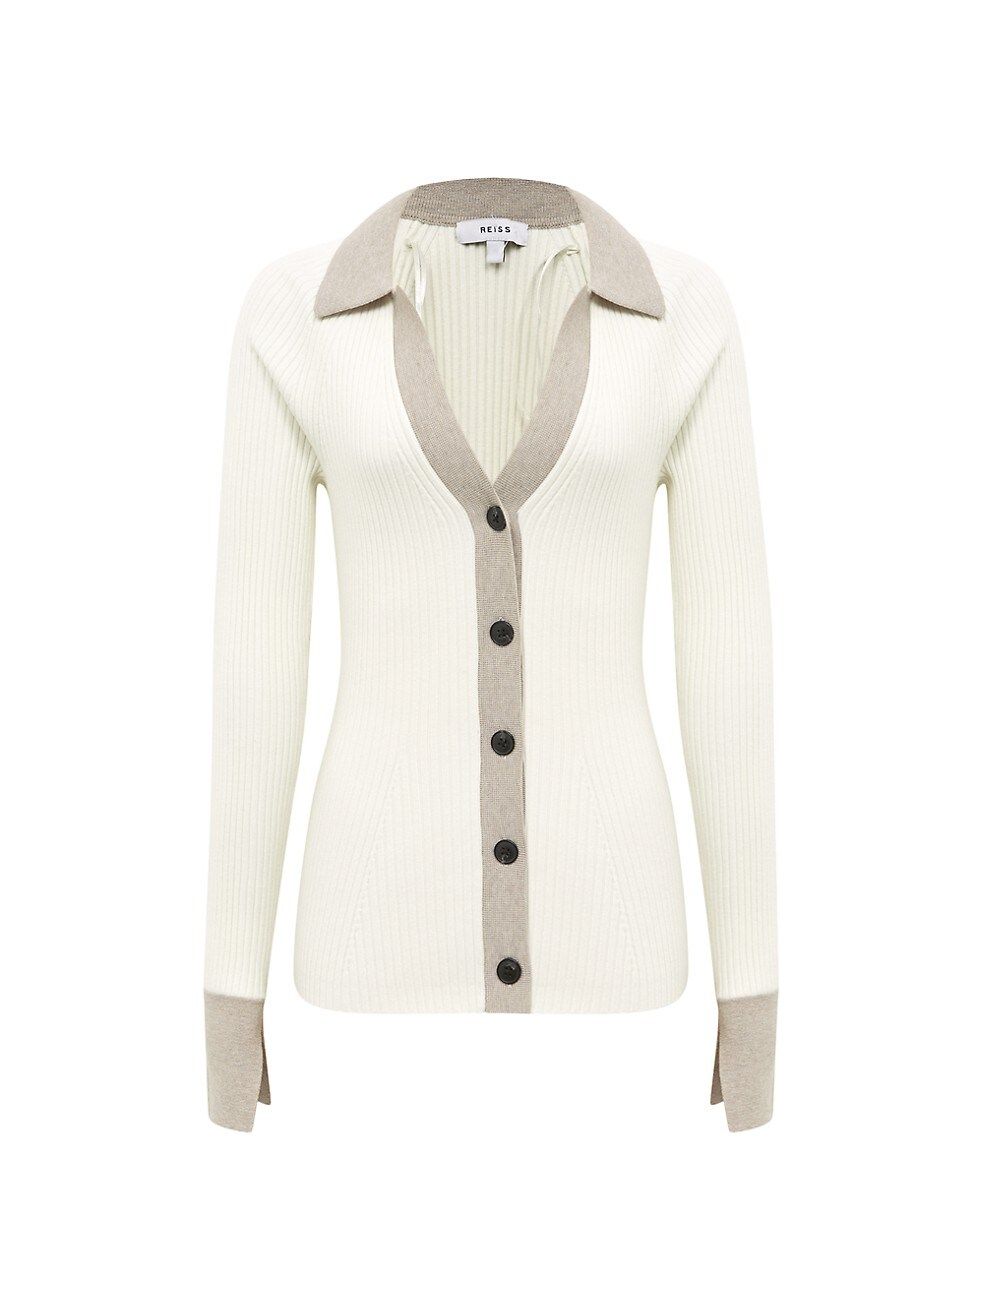 Reiss Alicia Rib-Knit Buttoned Top | Saks Fifth Avenue